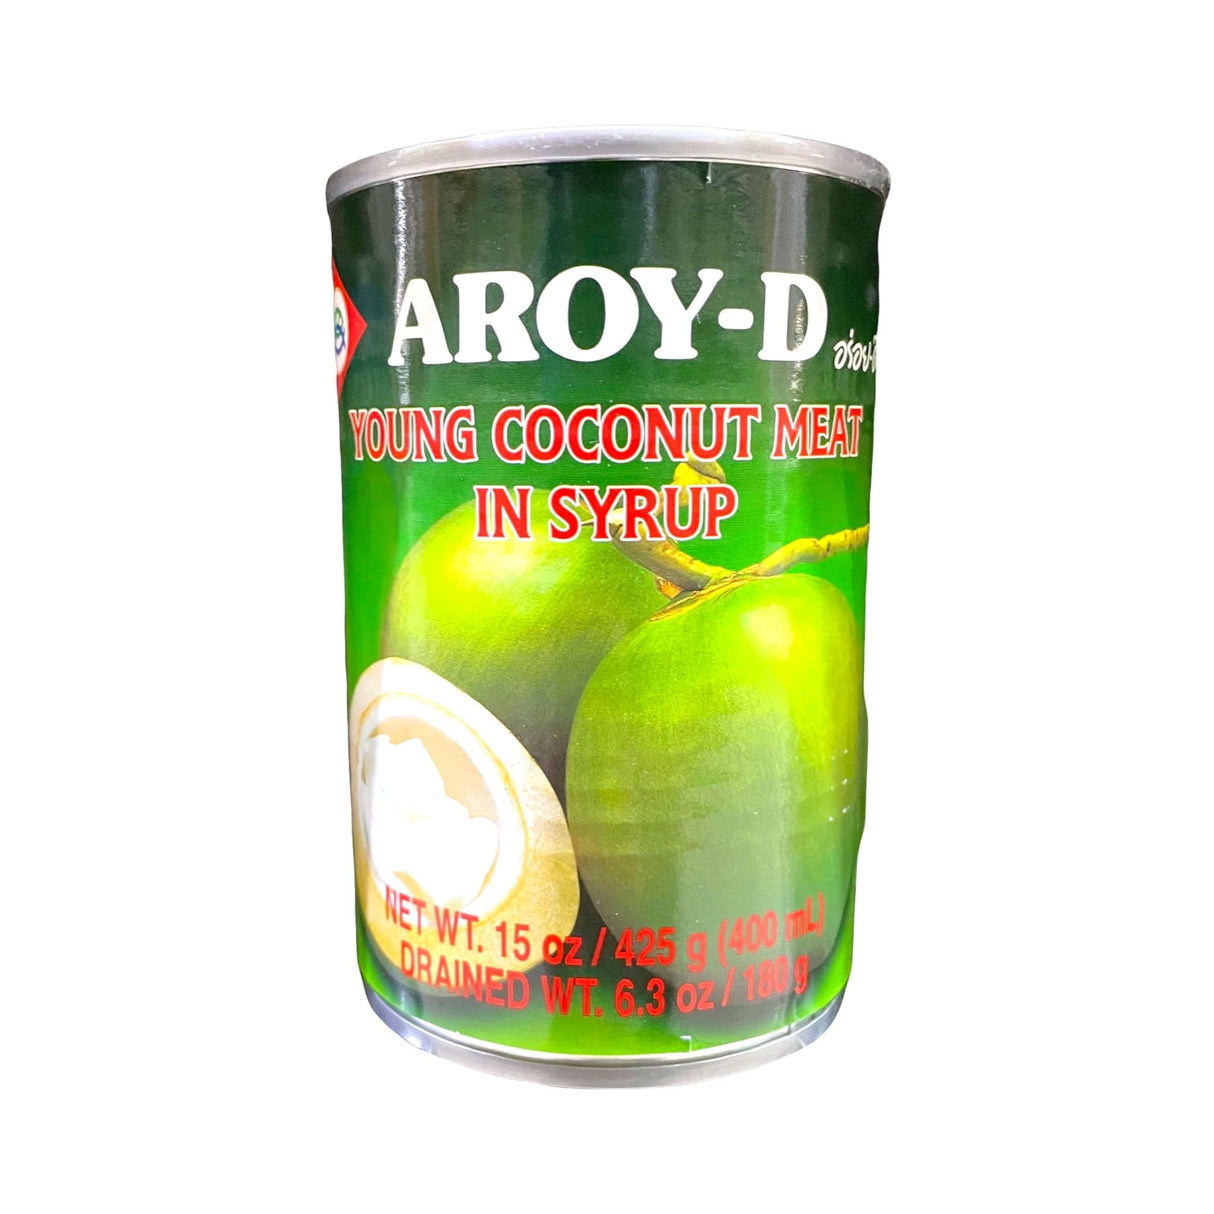 Aroy-d Young Coconut Meat in Syrup